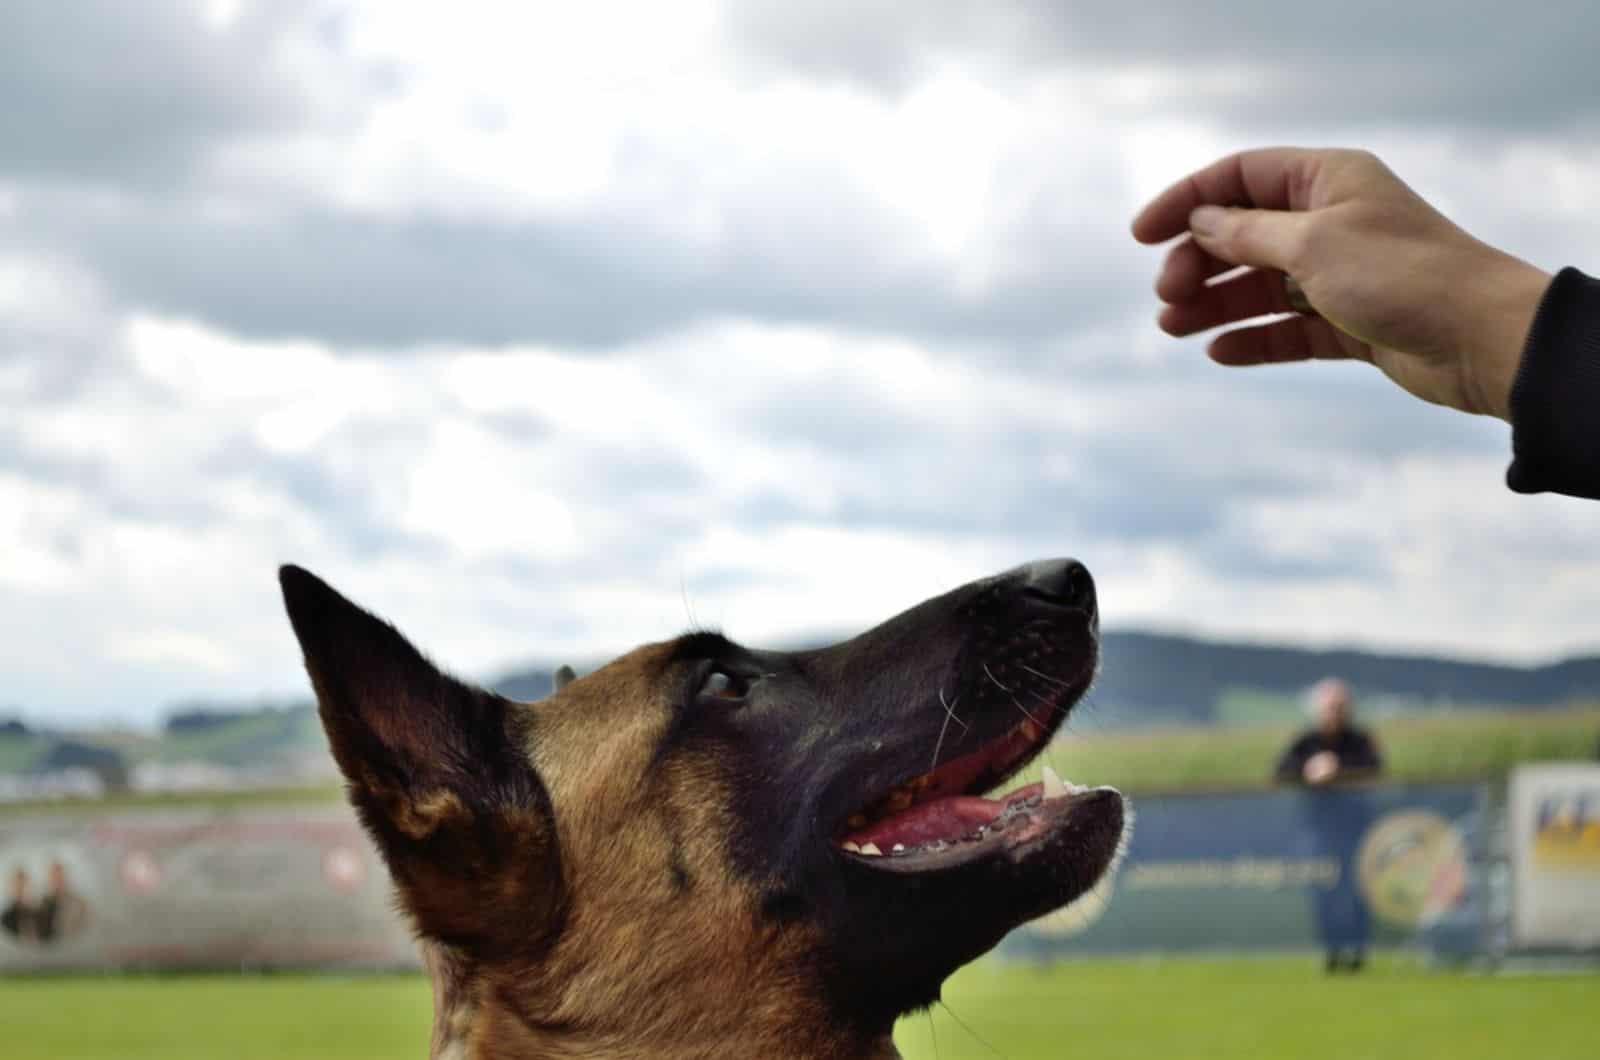 german shepherd dog looks closely at the owner's hand